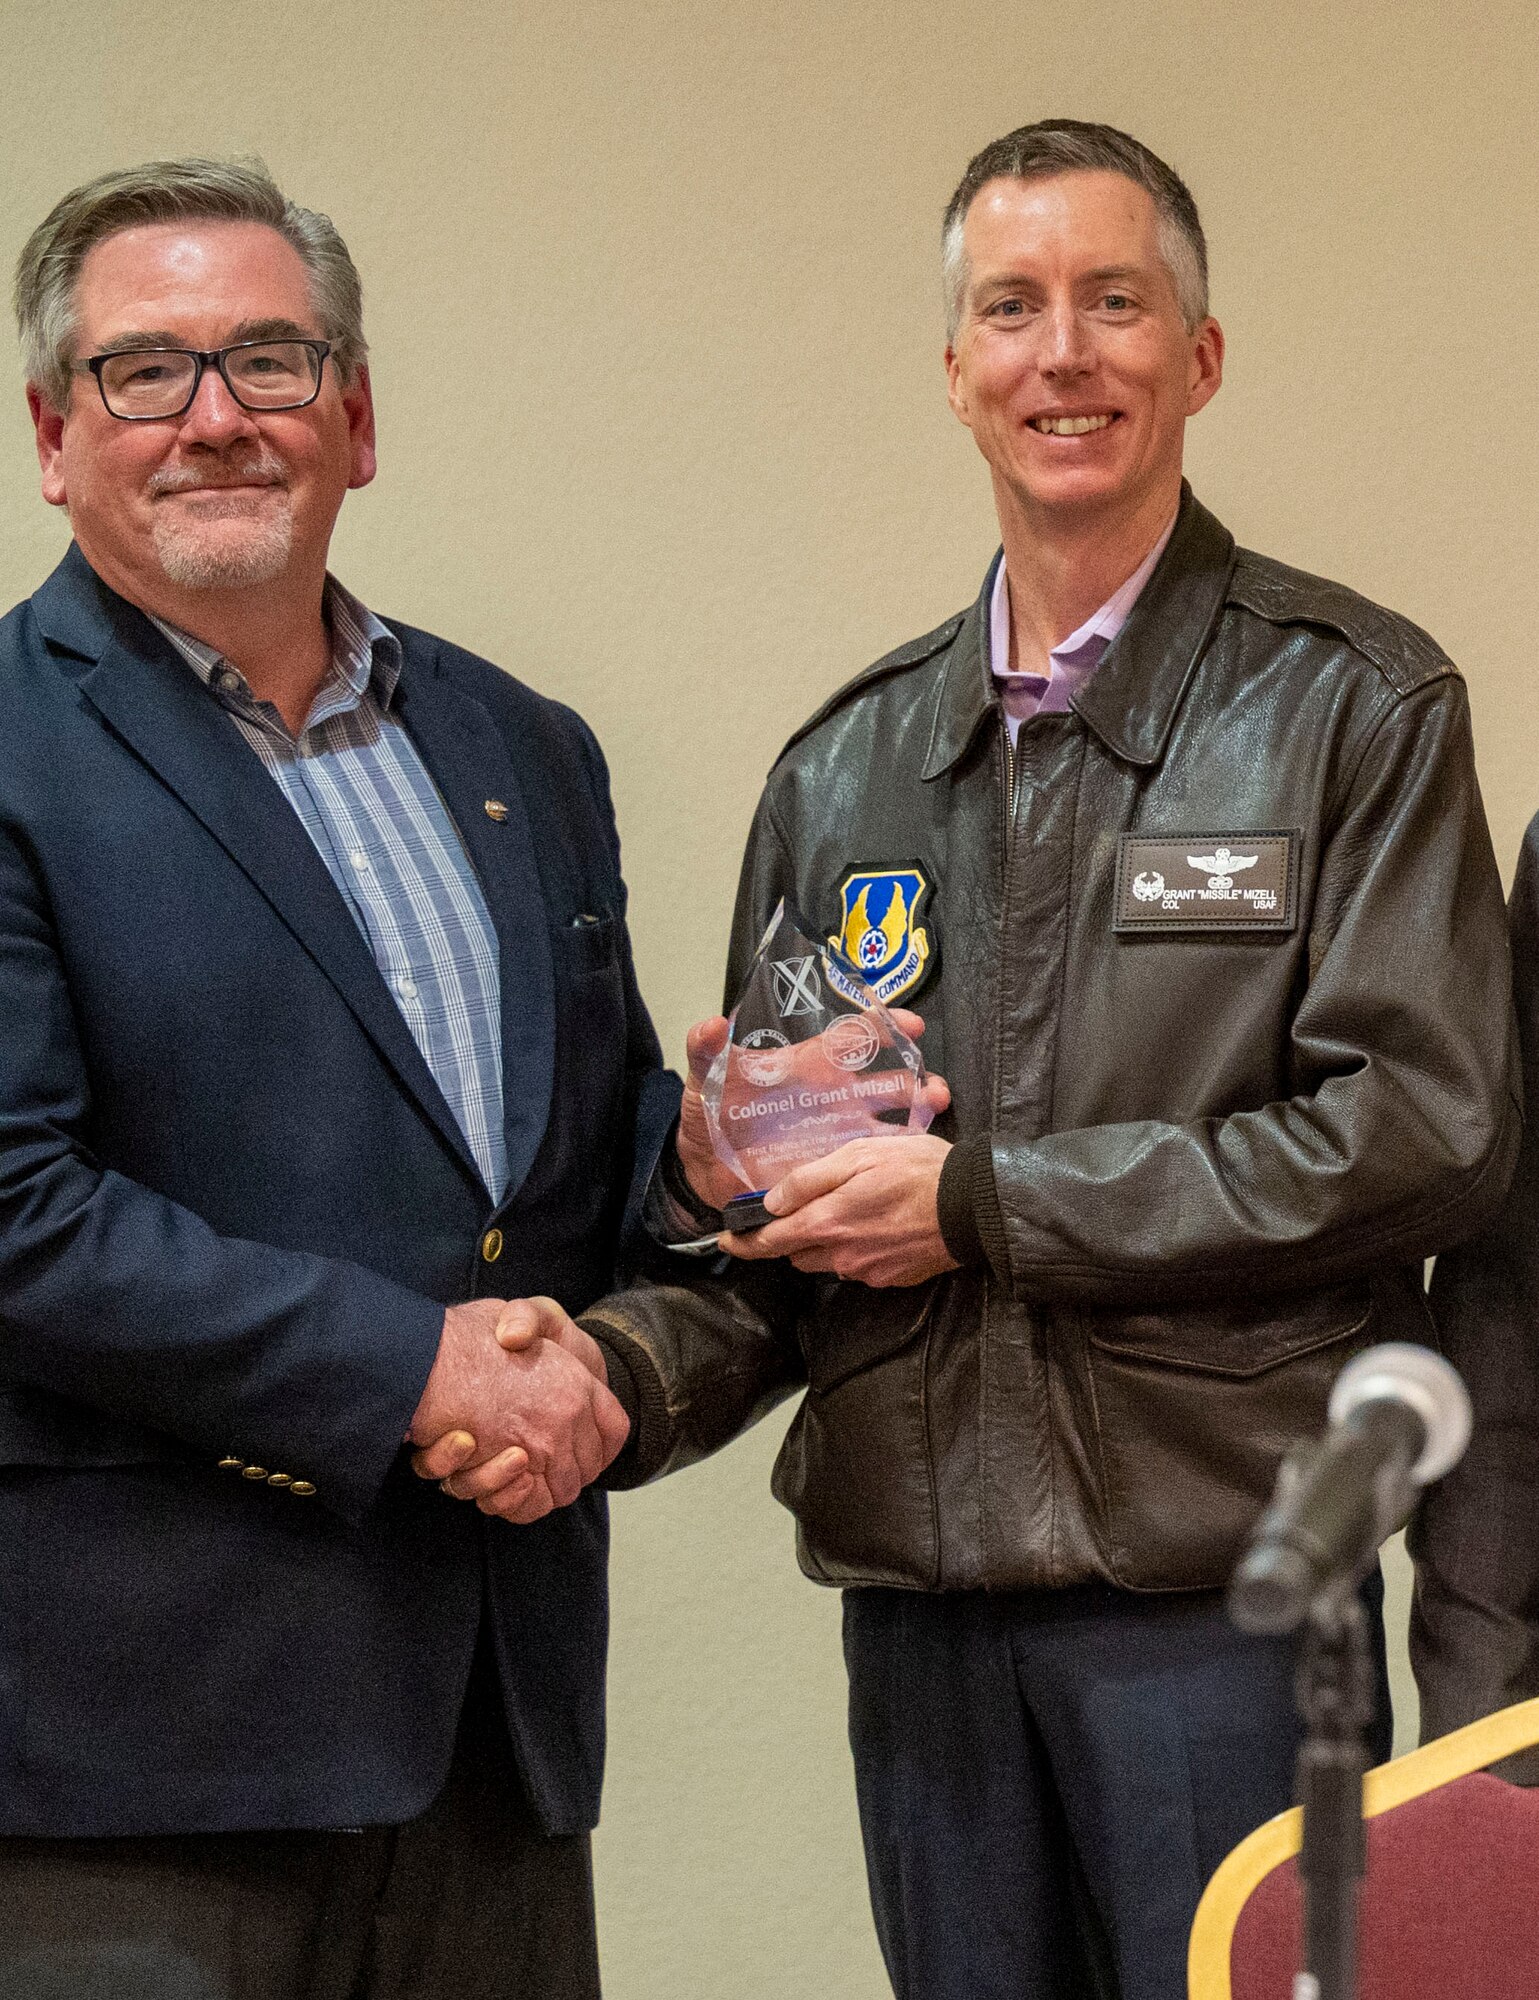 Col. Grant Mizell, Commander, 412th Operations Group receives an award from Mr. James Sergeant, Society of Flight Test Engineers, for moderating the First Flight Consideration Panel.